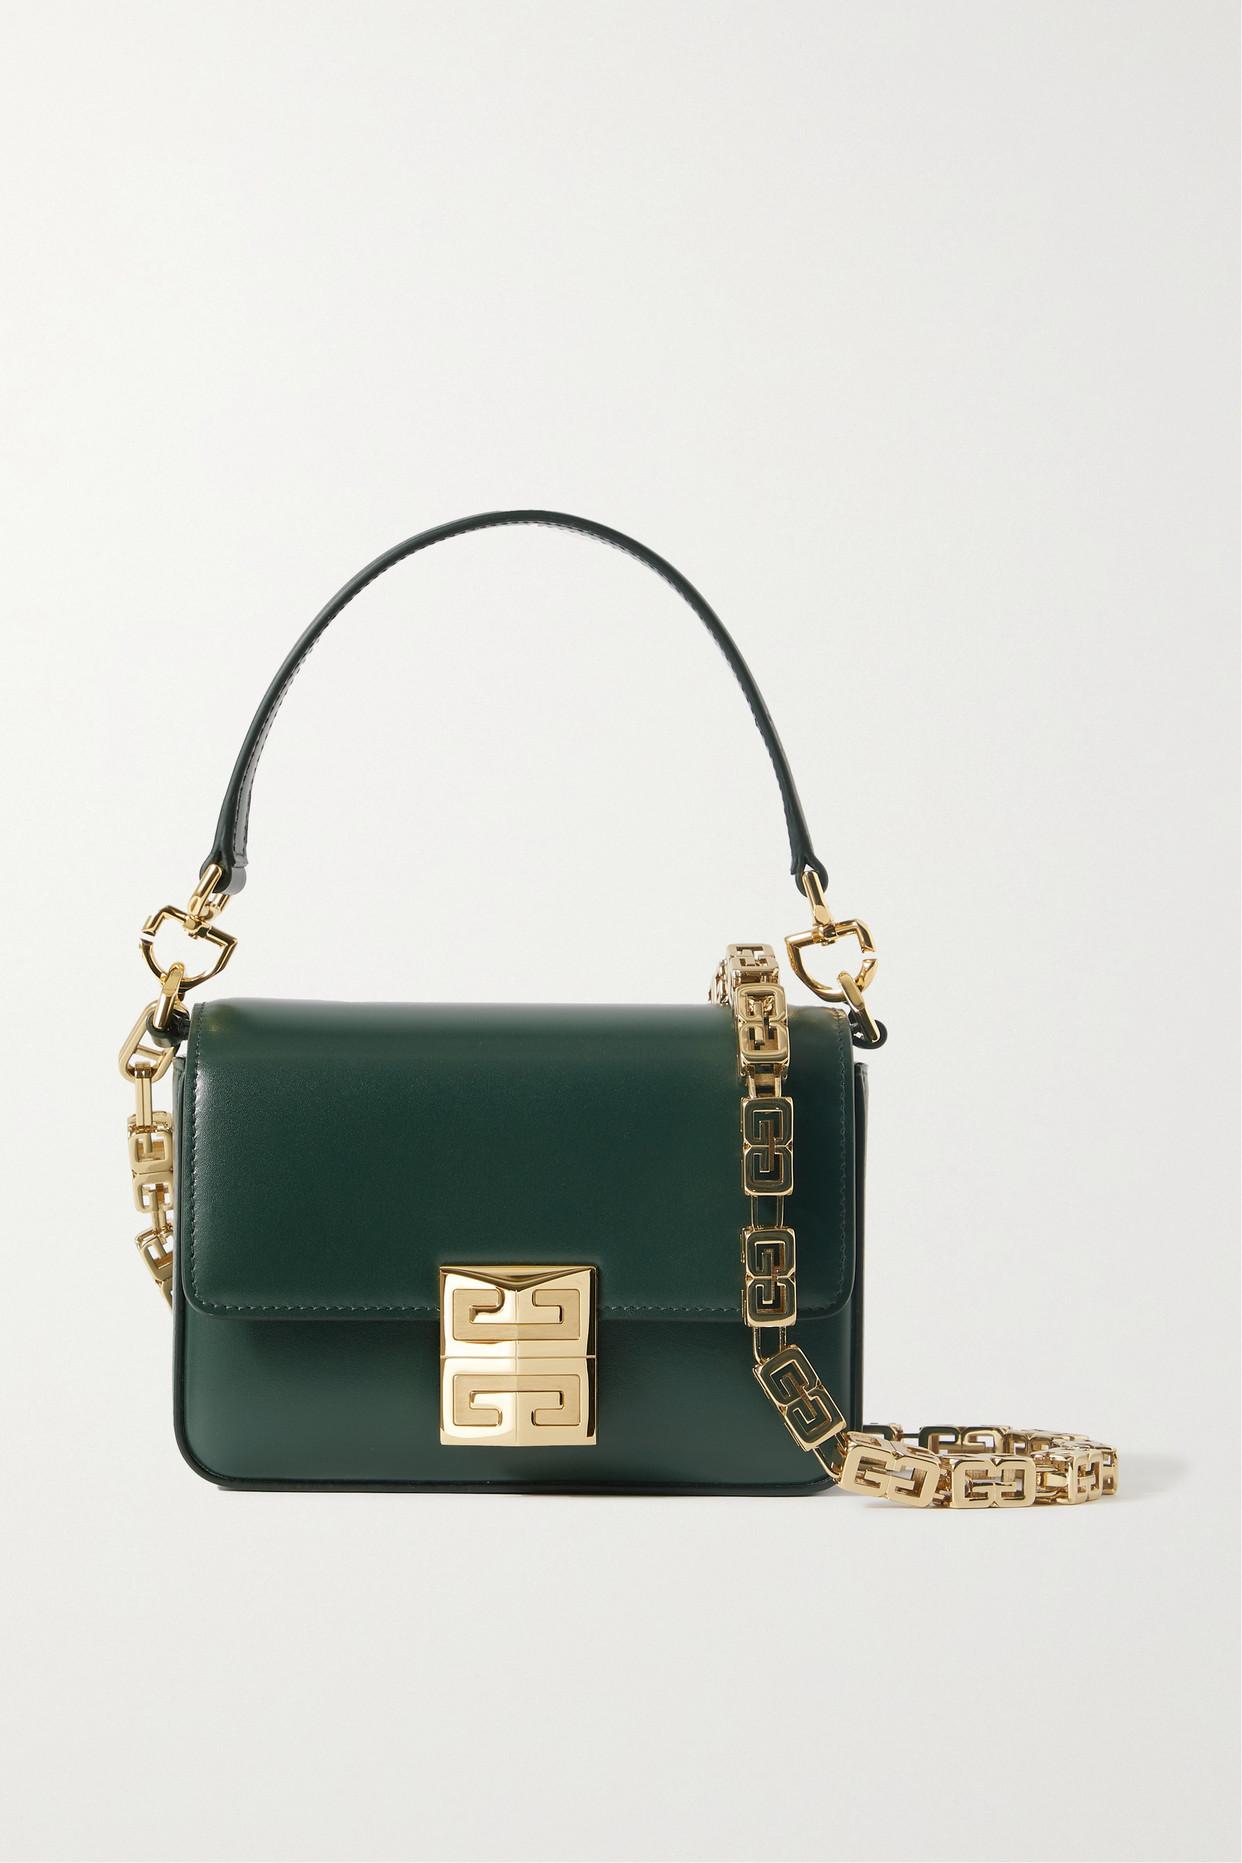 Givenchy 4g Small Leather Shoulder Bag in Green | Lyst